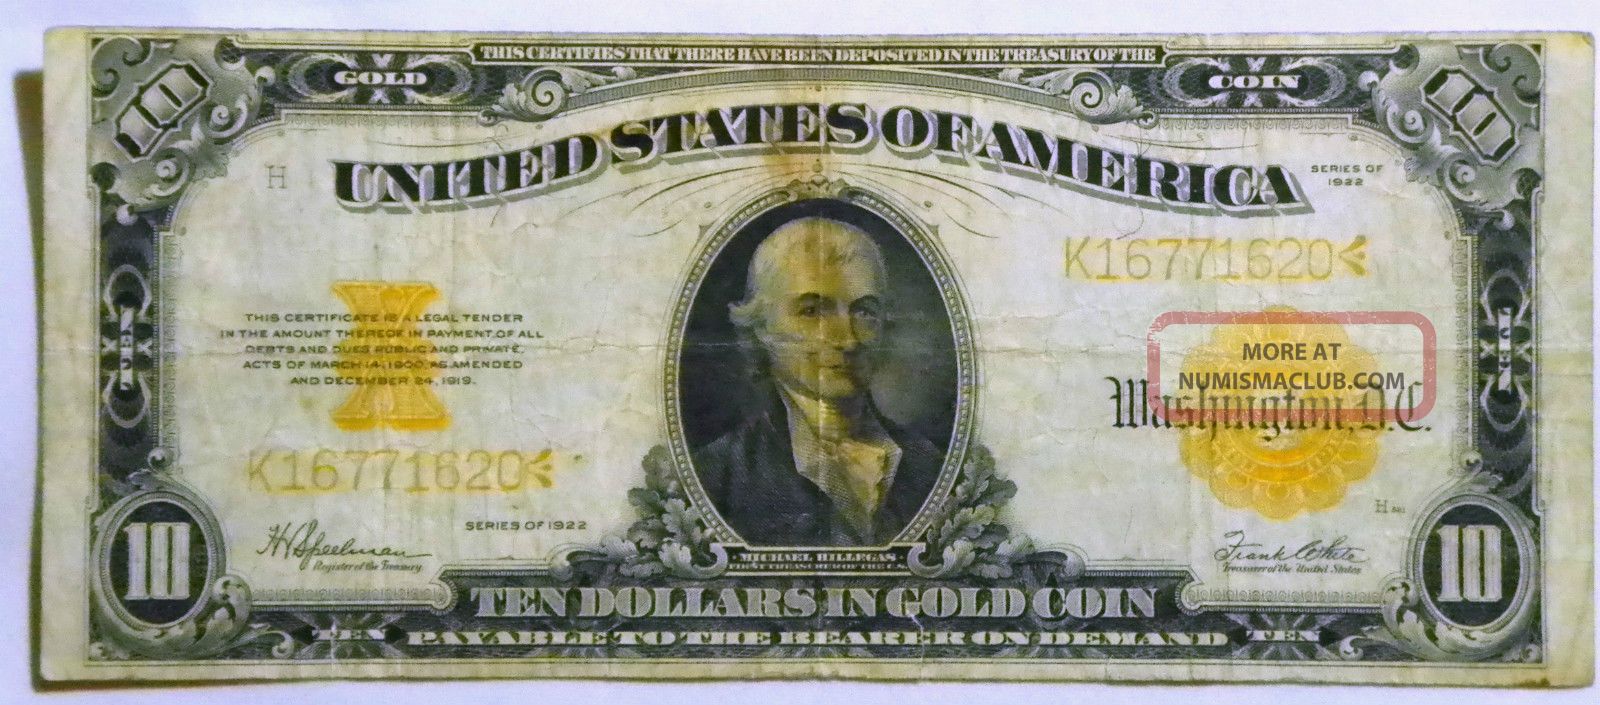 1922 $10 Gold Certificate Gold Coin Large Size Note Speelman White K16771620 Large Size Notes photo